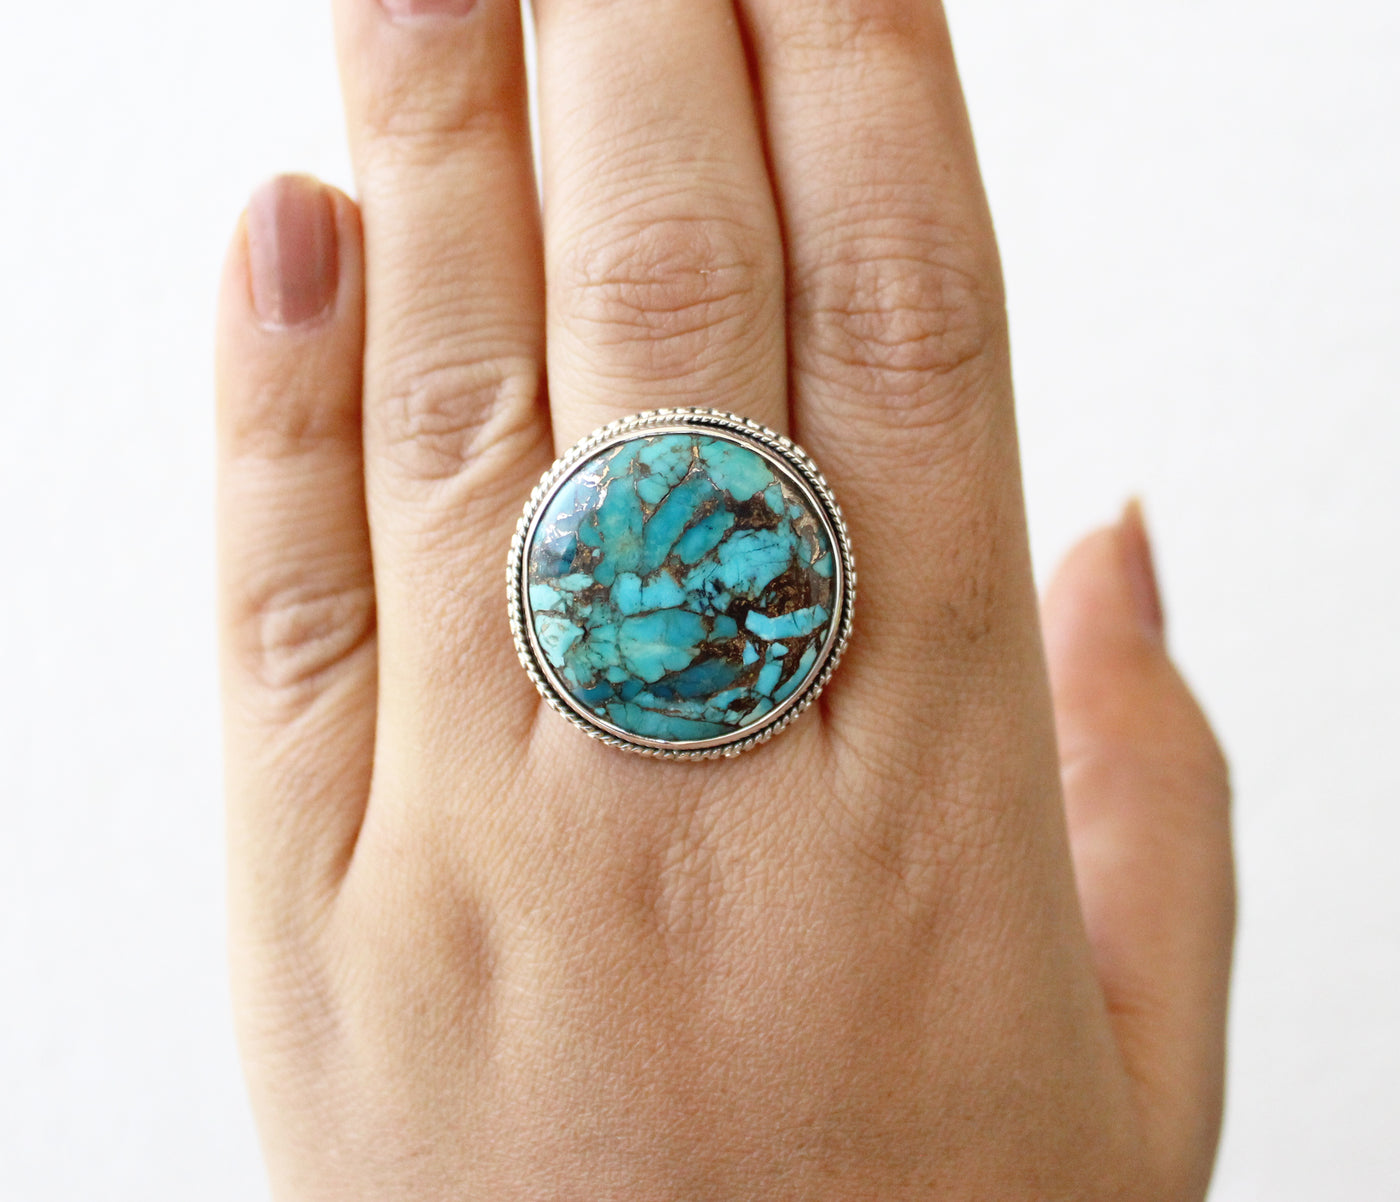 Copper Turquoise Round Ring, Jewelry Handmade, December Birthstone , Bohemian Jewelry, Statement Ring, Large Silver Rings